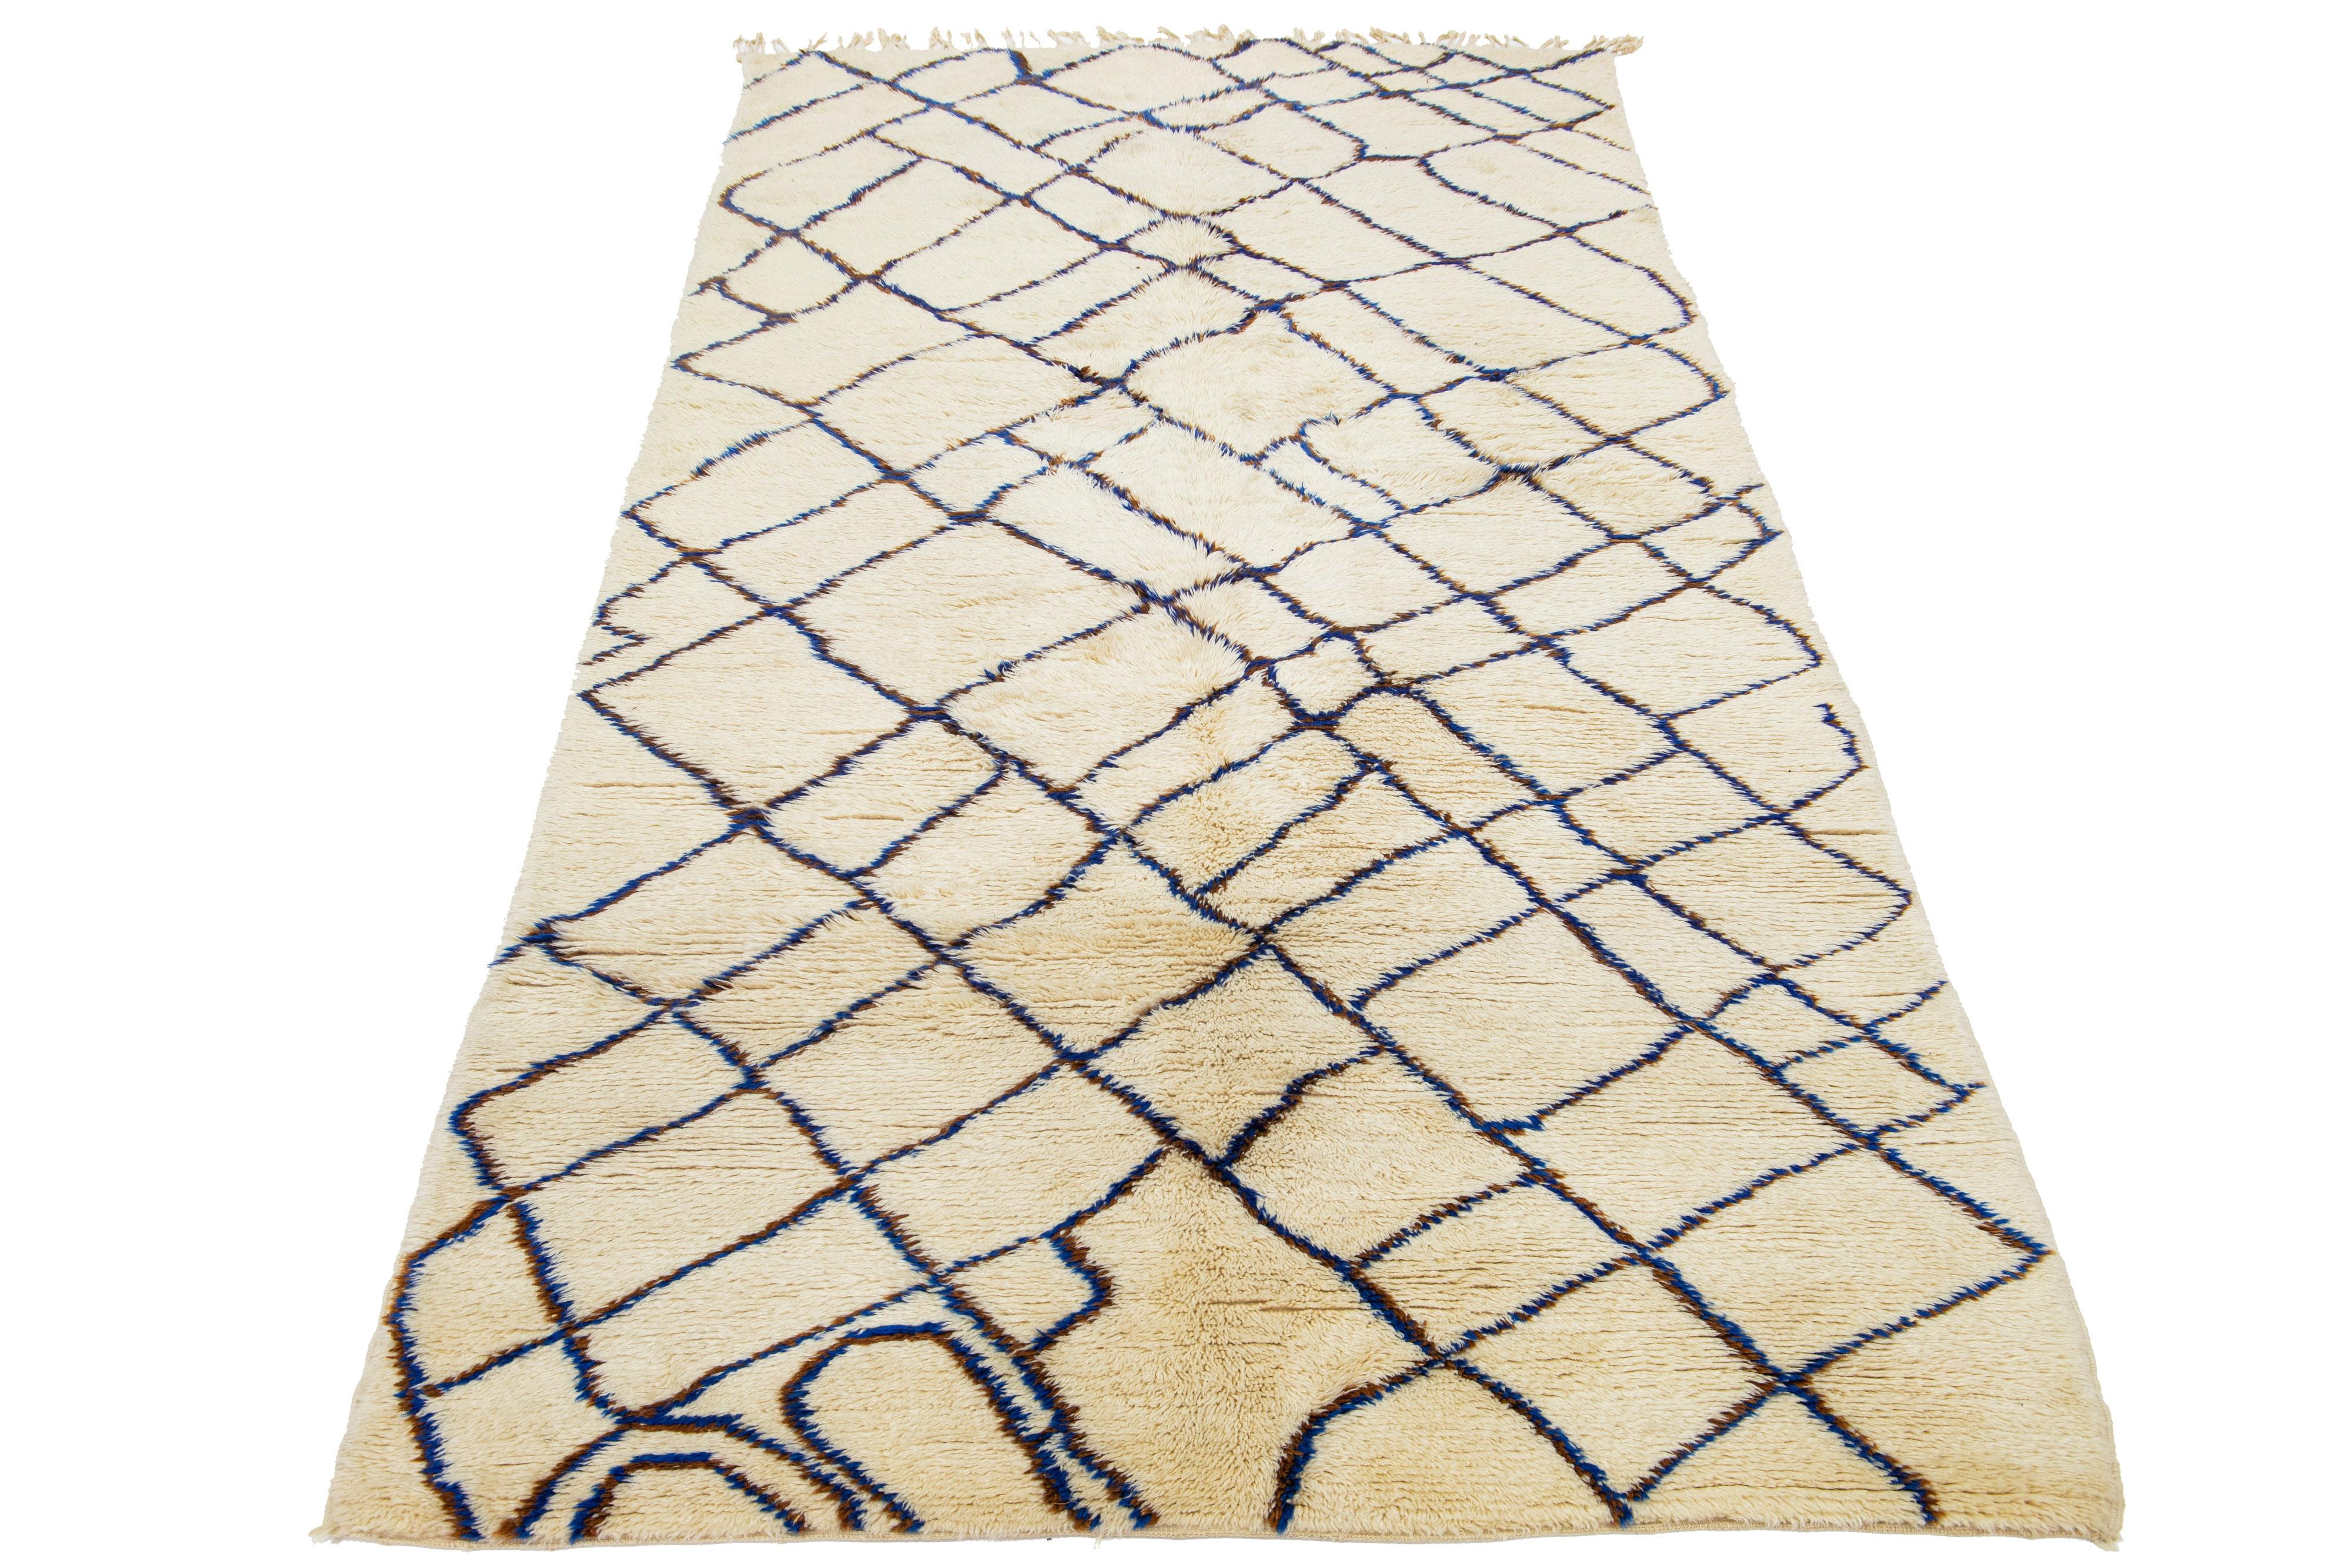 This beautiful, modern Moroccan, hand-knotted wool rug features a natural ivory field. Highlights a stunning, soft, linear design with fringes on the ends.

This rug measures 6'1